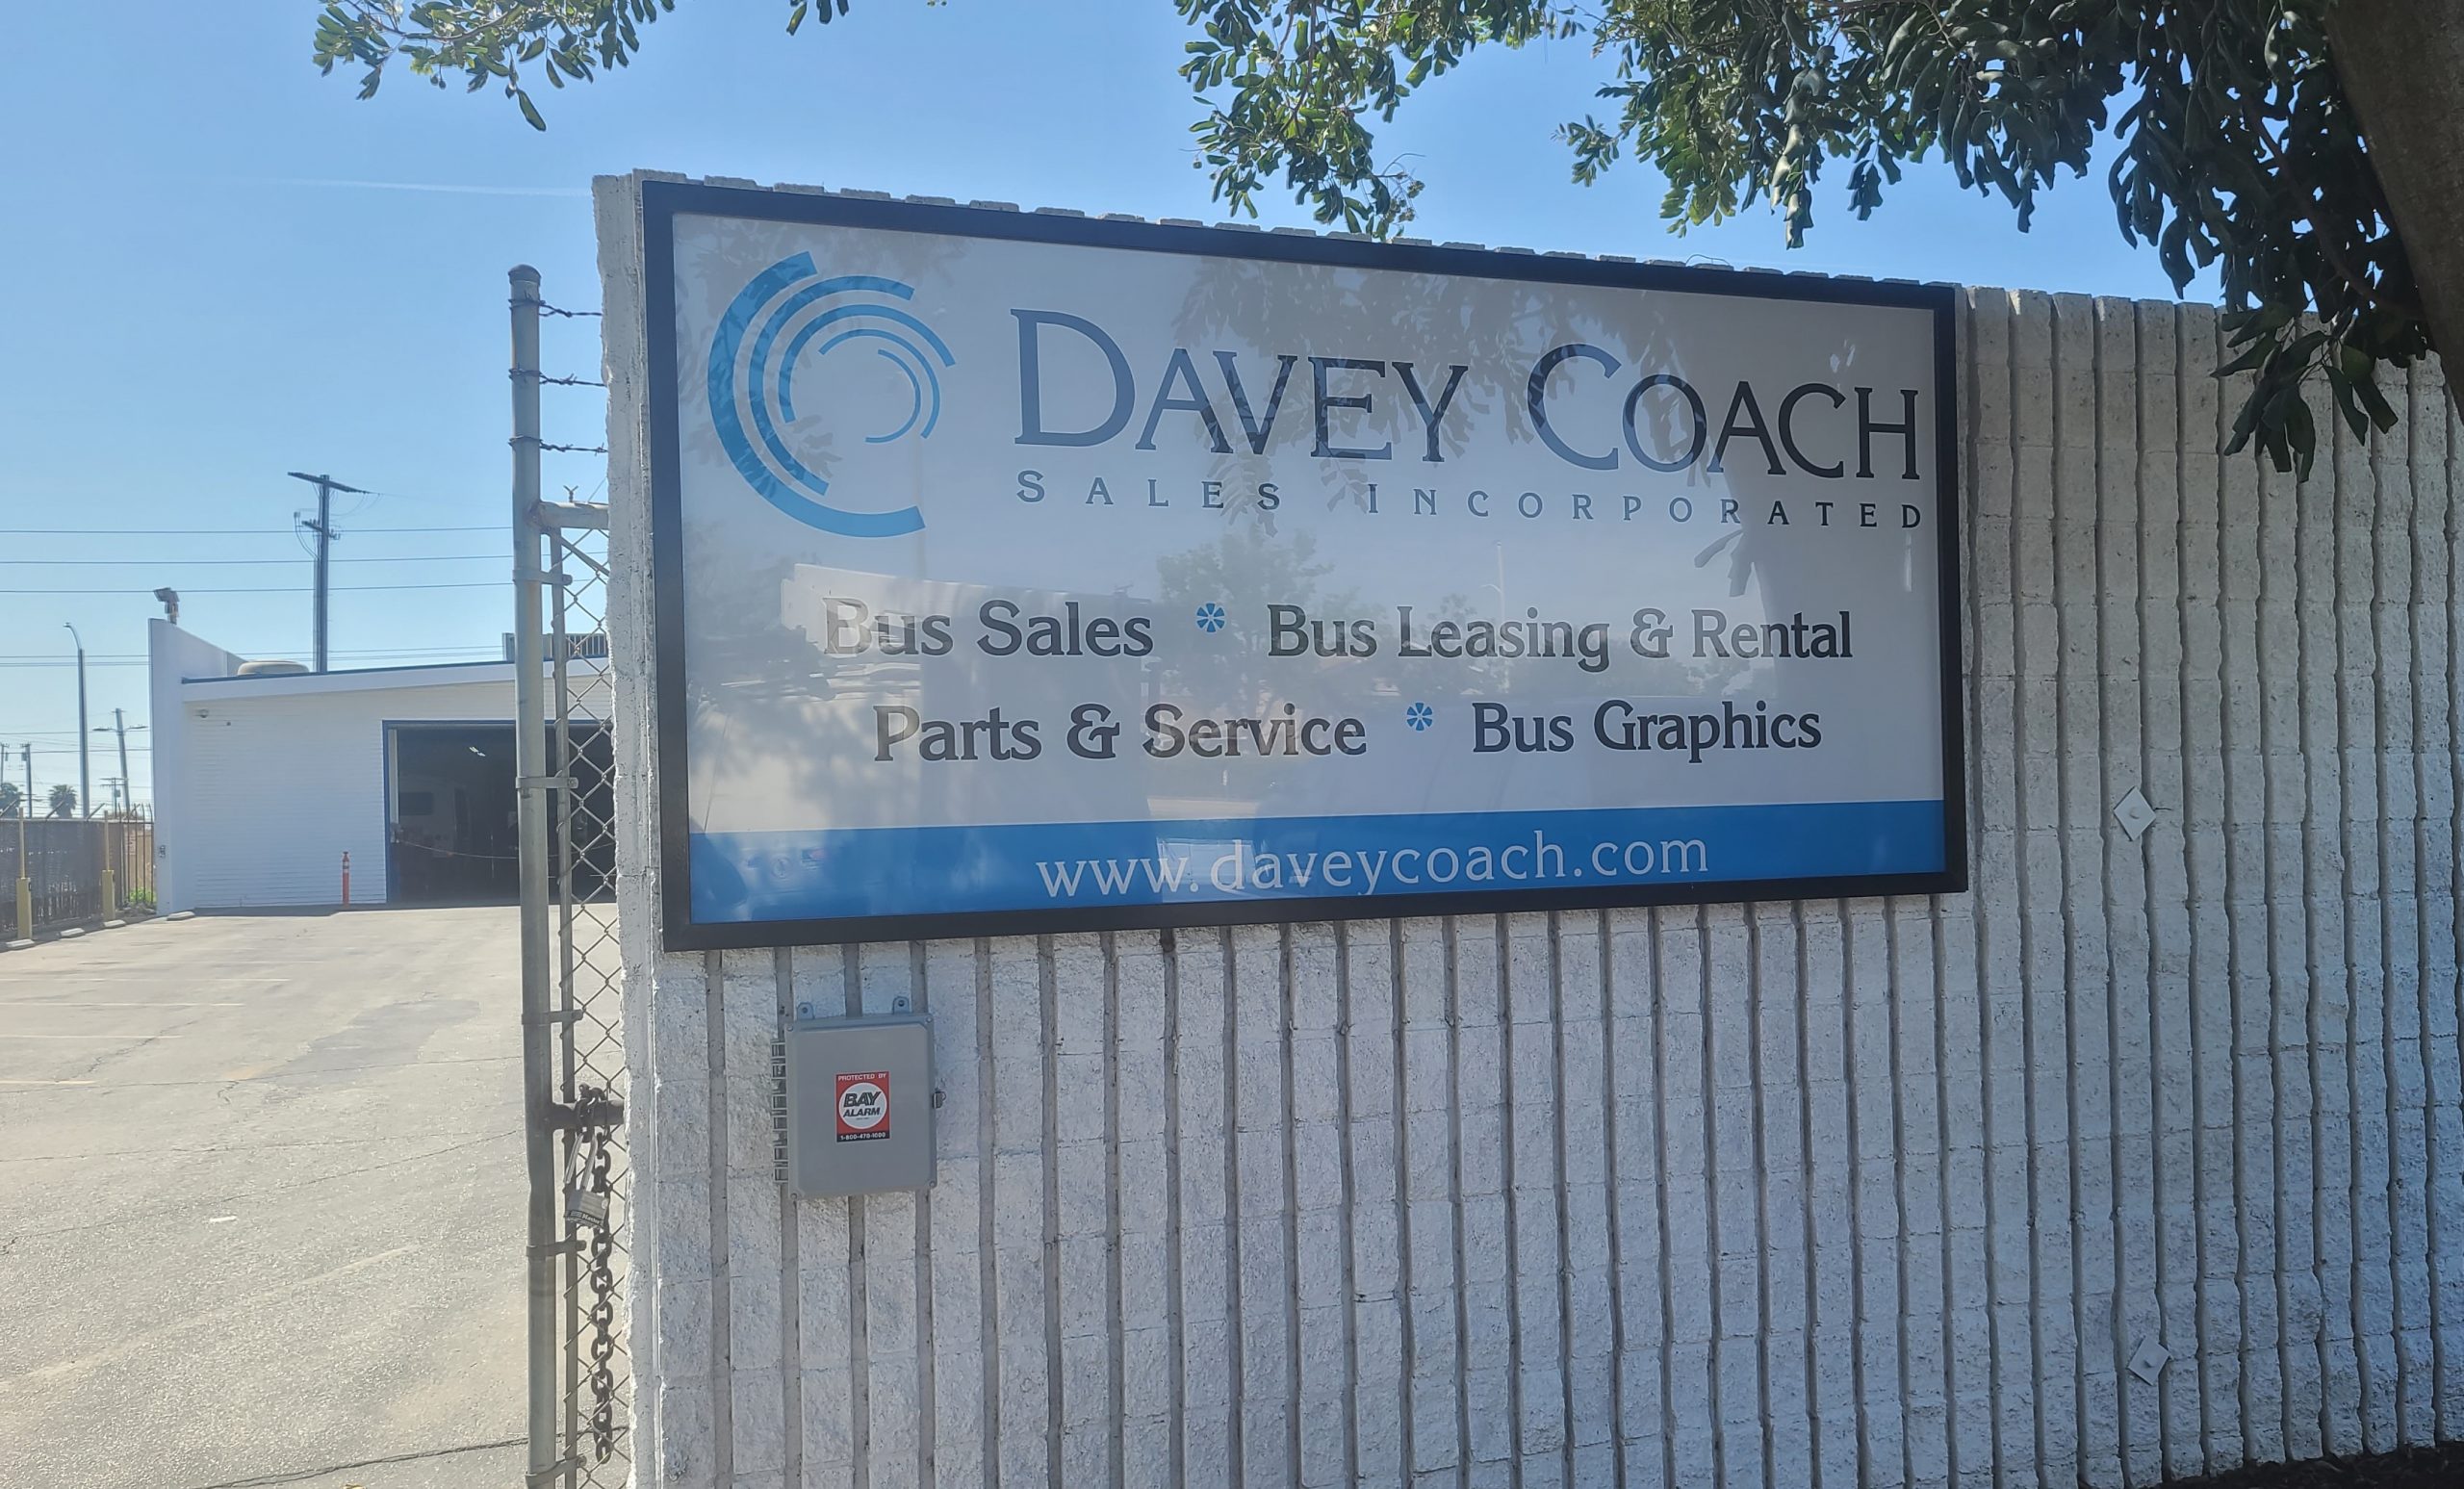 ﻿Additional signage for Davey Coach in Norwalk as part of their custom metal business sign package. And window graphics as well.